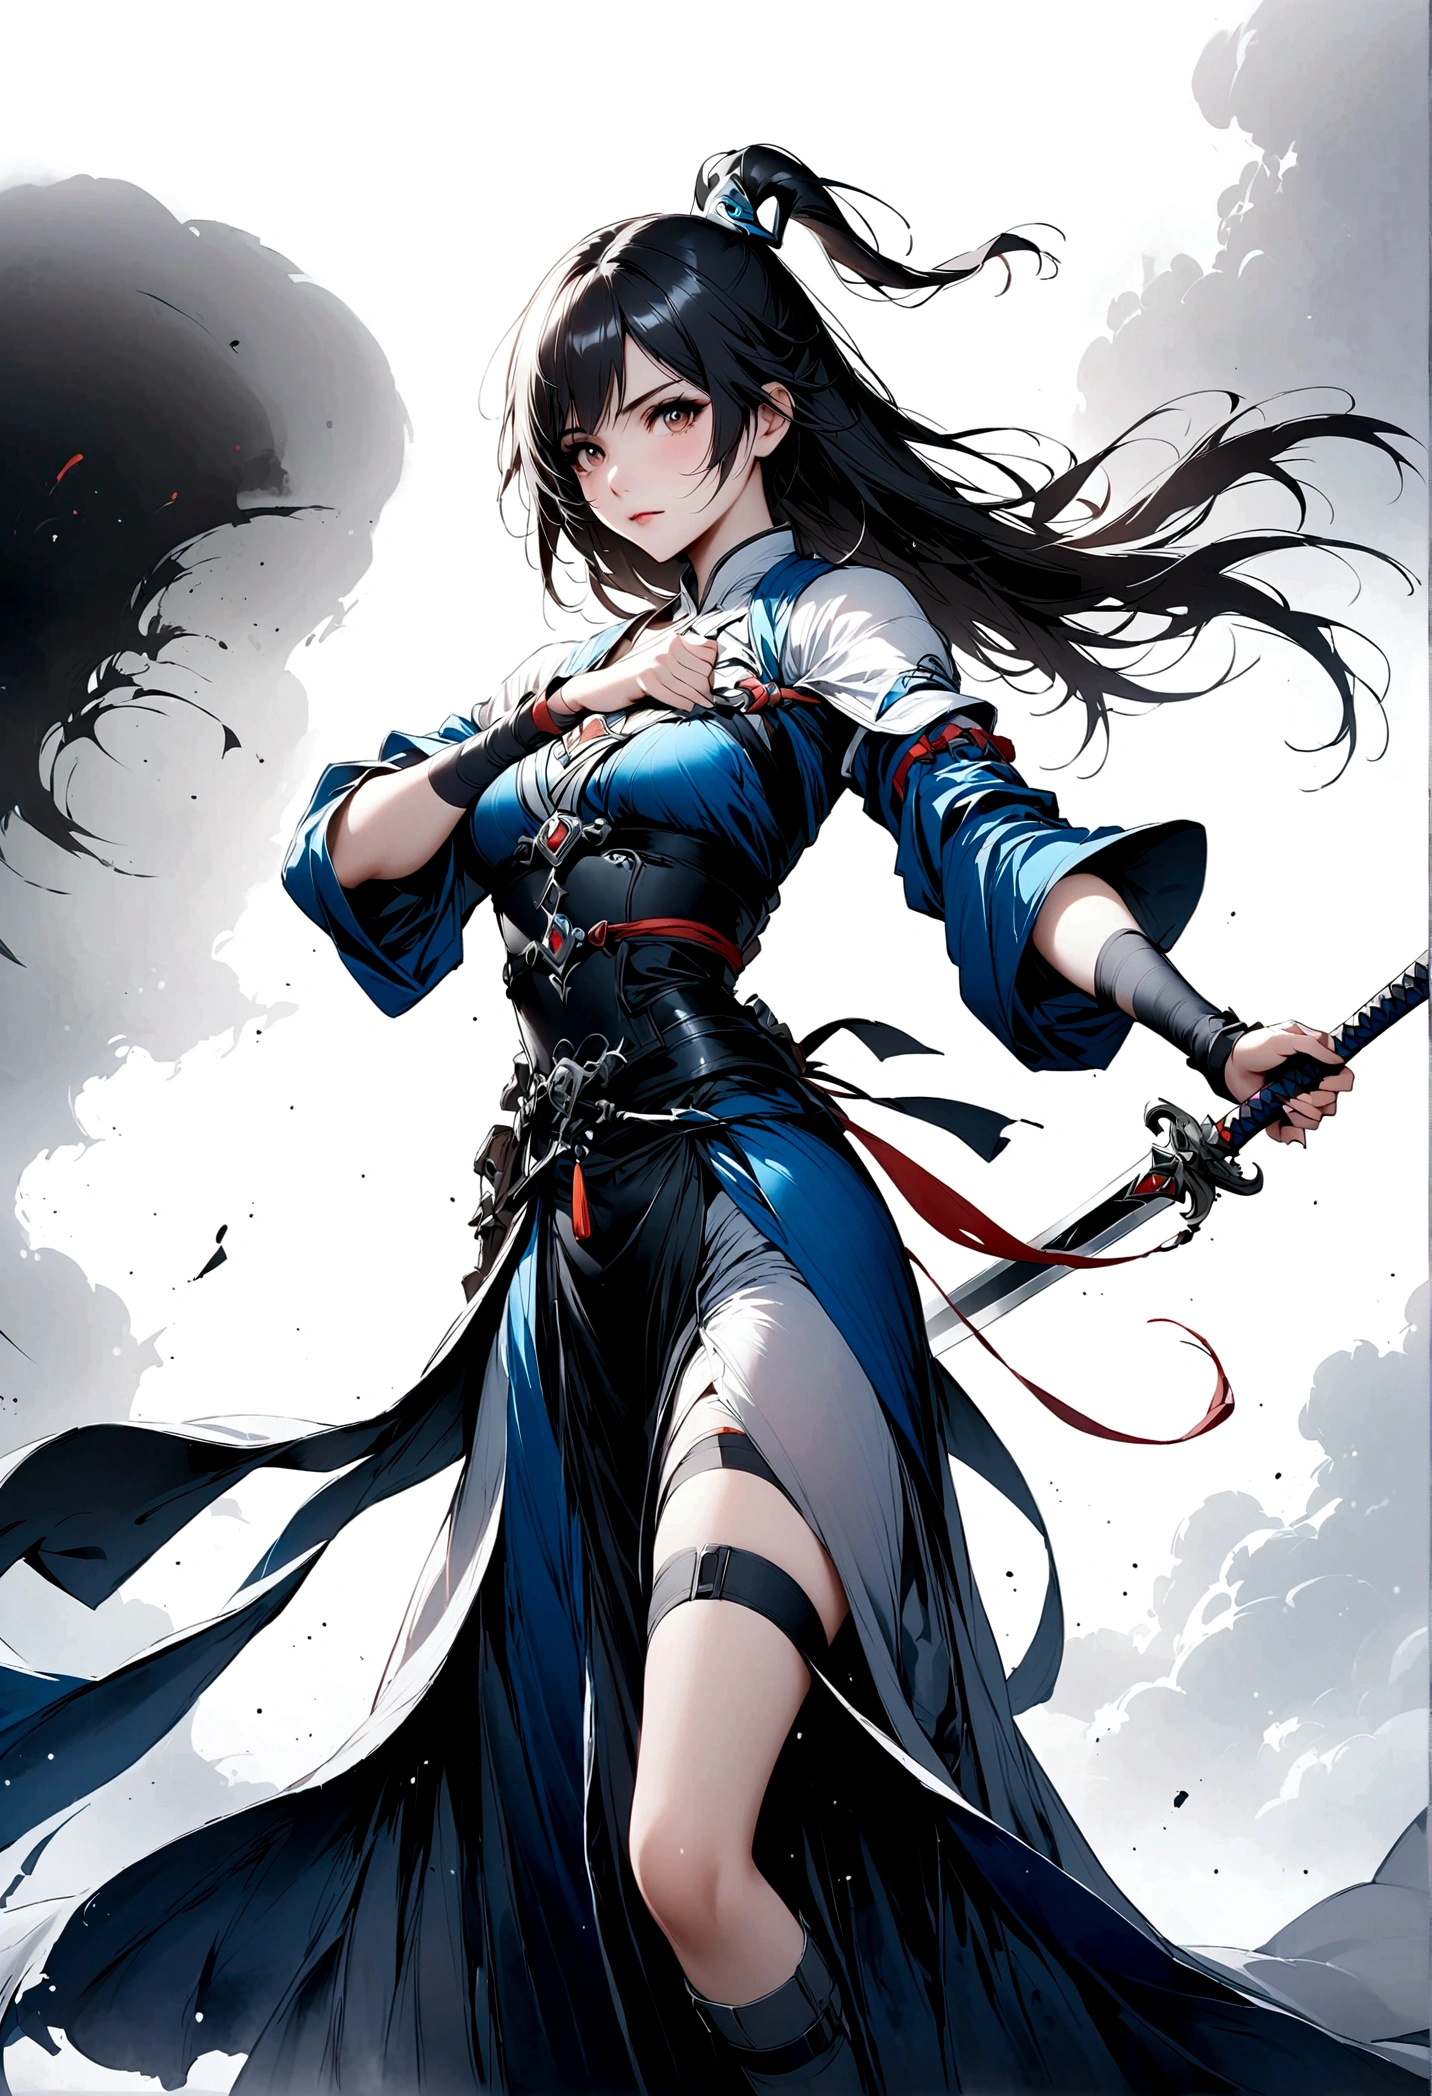 Artistic ink painting，Three-dimensional ink painting，Minimalism，Minimalist graphics，Minimal Art，Anime girl holding a sword，whole body，Chinese style，antiquity，Ink Painting，Blue robe，Black long hair，Black and white background，古韵White Space，White Space，大面积White Space，Texture Matte，Low saturation，Minimalist composition，Master composition